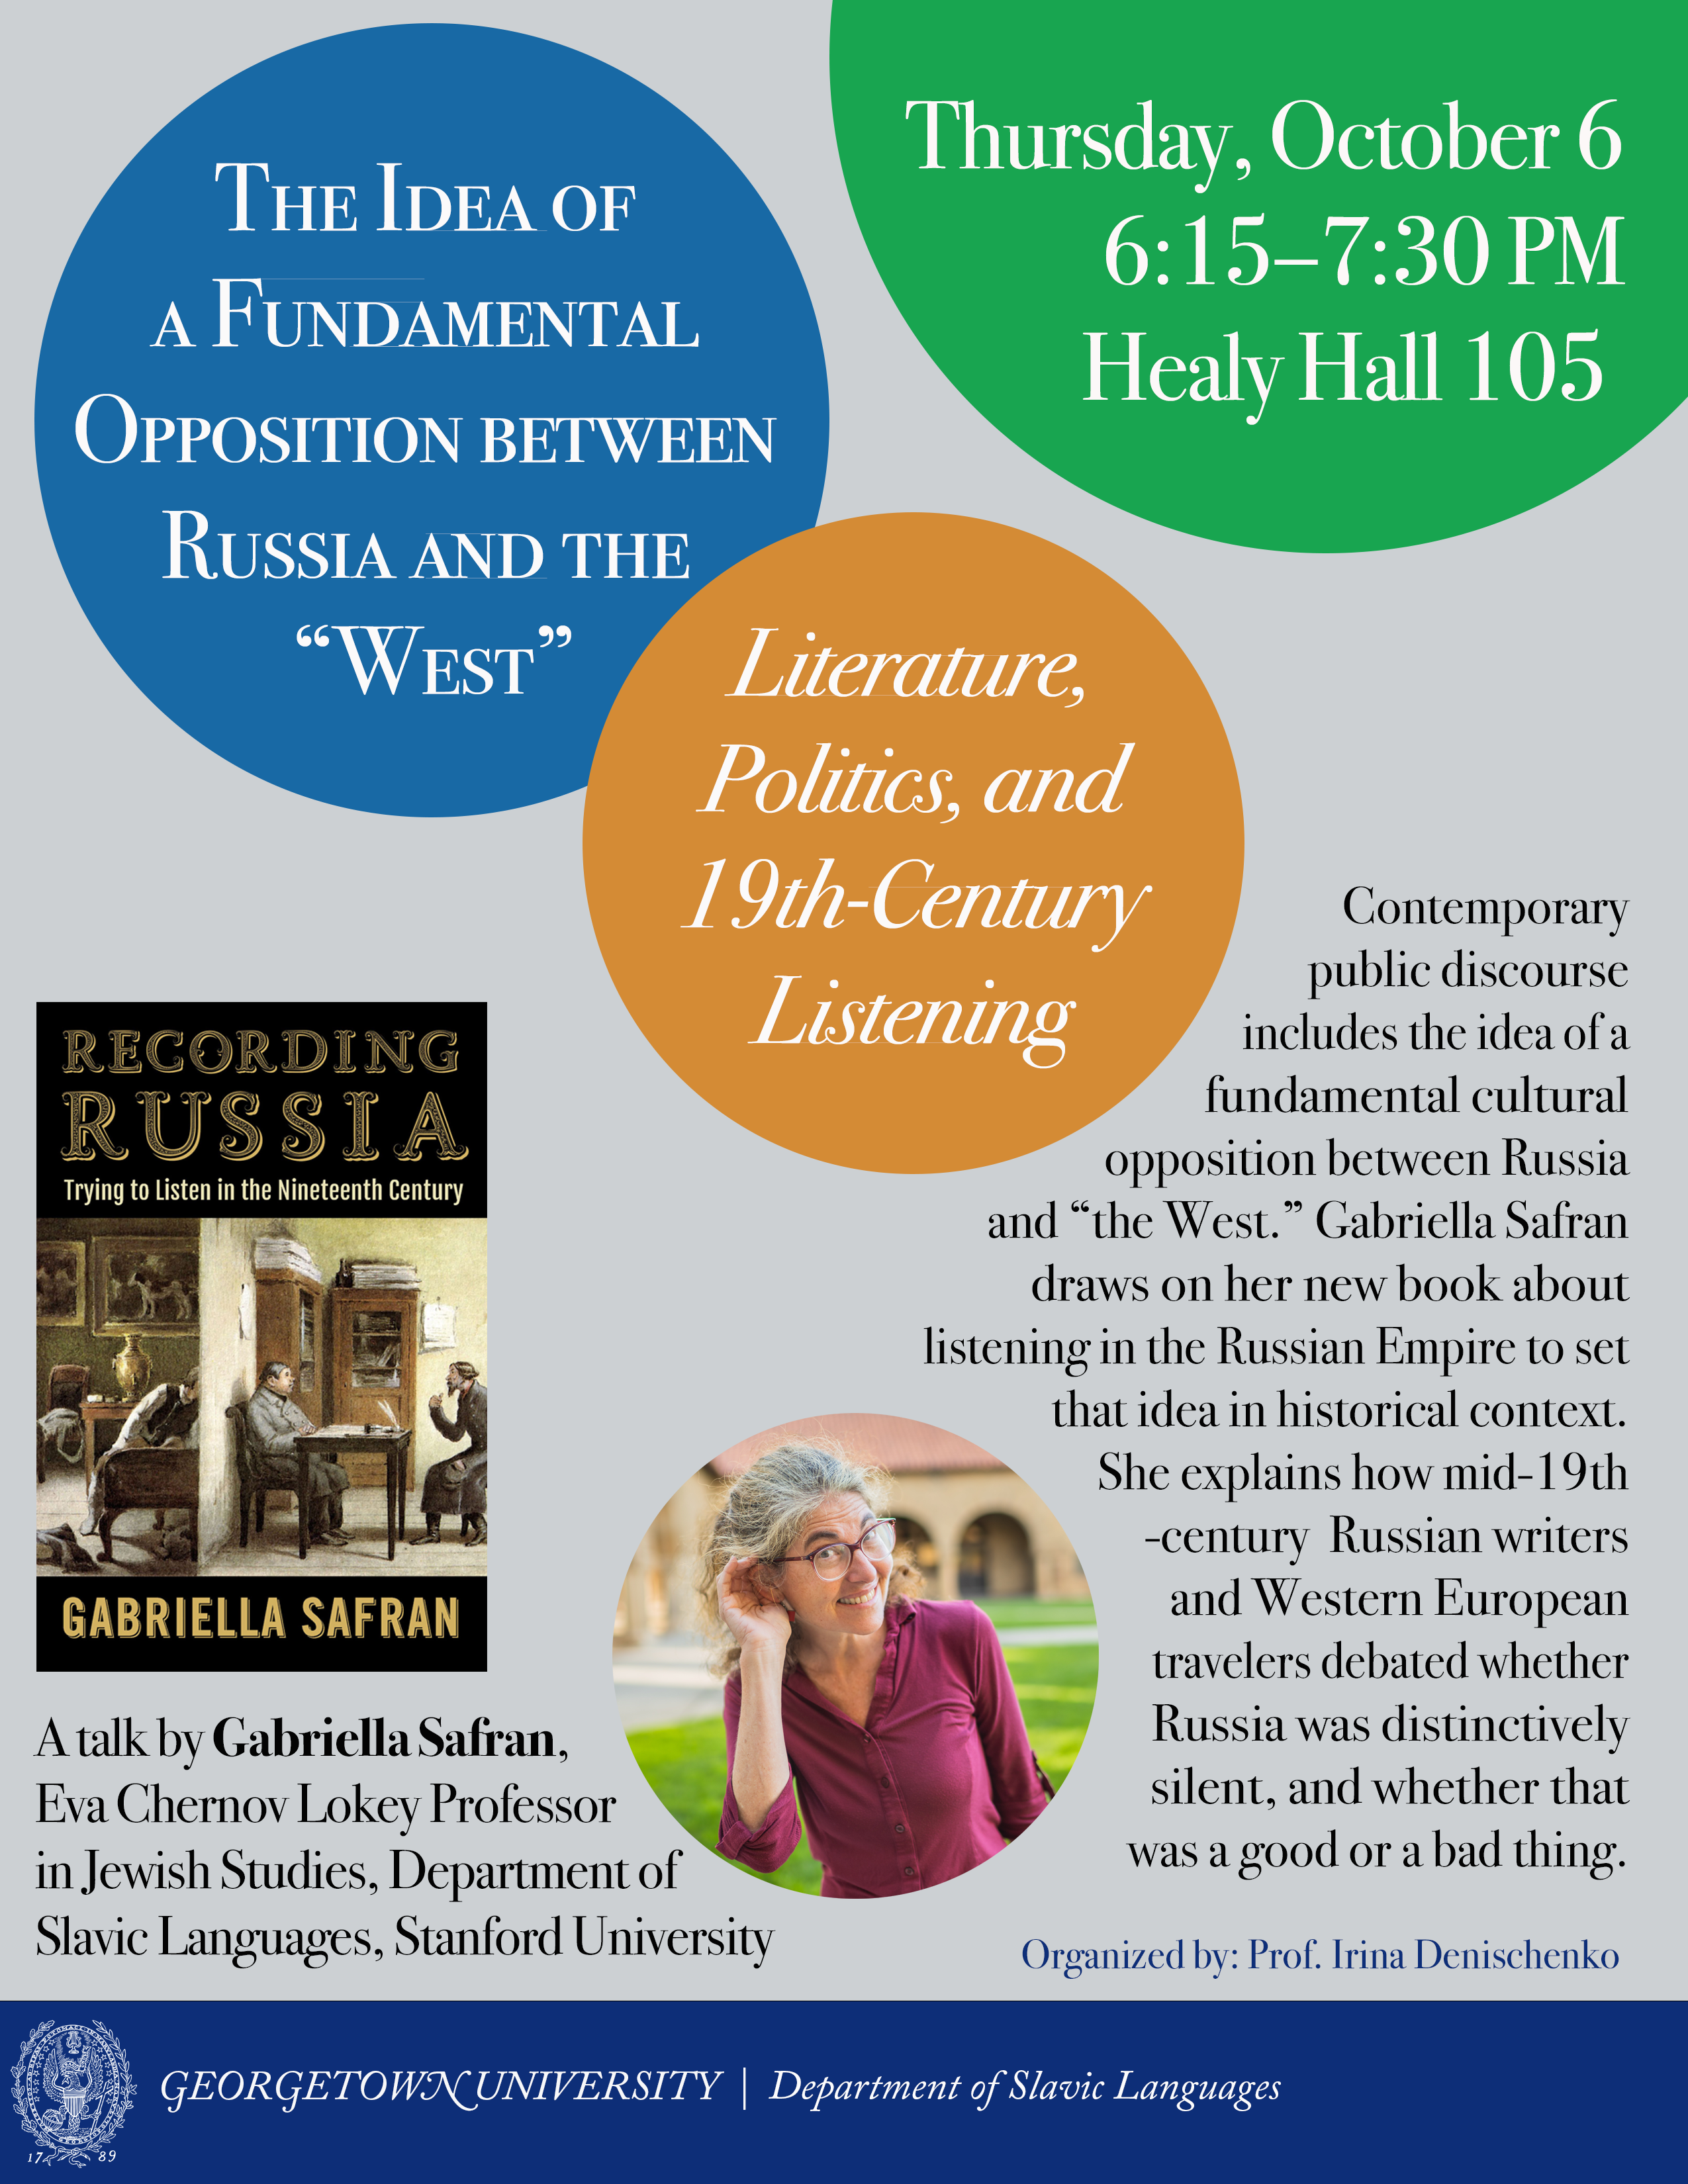 Recording Russia: Trying to Listen in the Nineteenth Century is forthcoming. She is now beginning a book about the rise of the notion of Jewish speech style, in multiple languages, as comical. Contemporary public discourse includes the idea of a fundamental cultural opposition between Russia and 